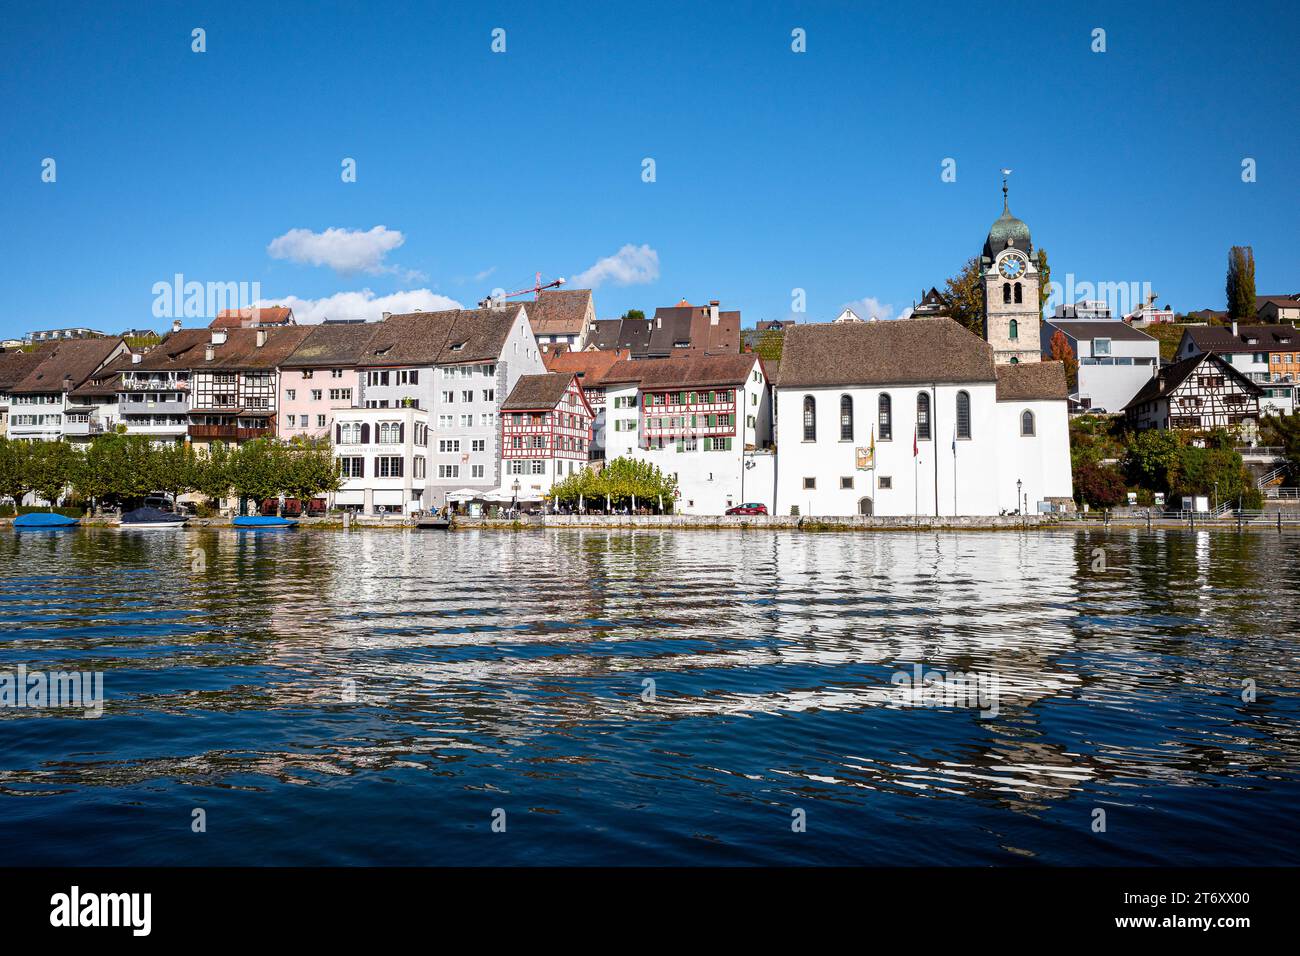 Old historic  town along the rhine river in Switzerland Stock Photo